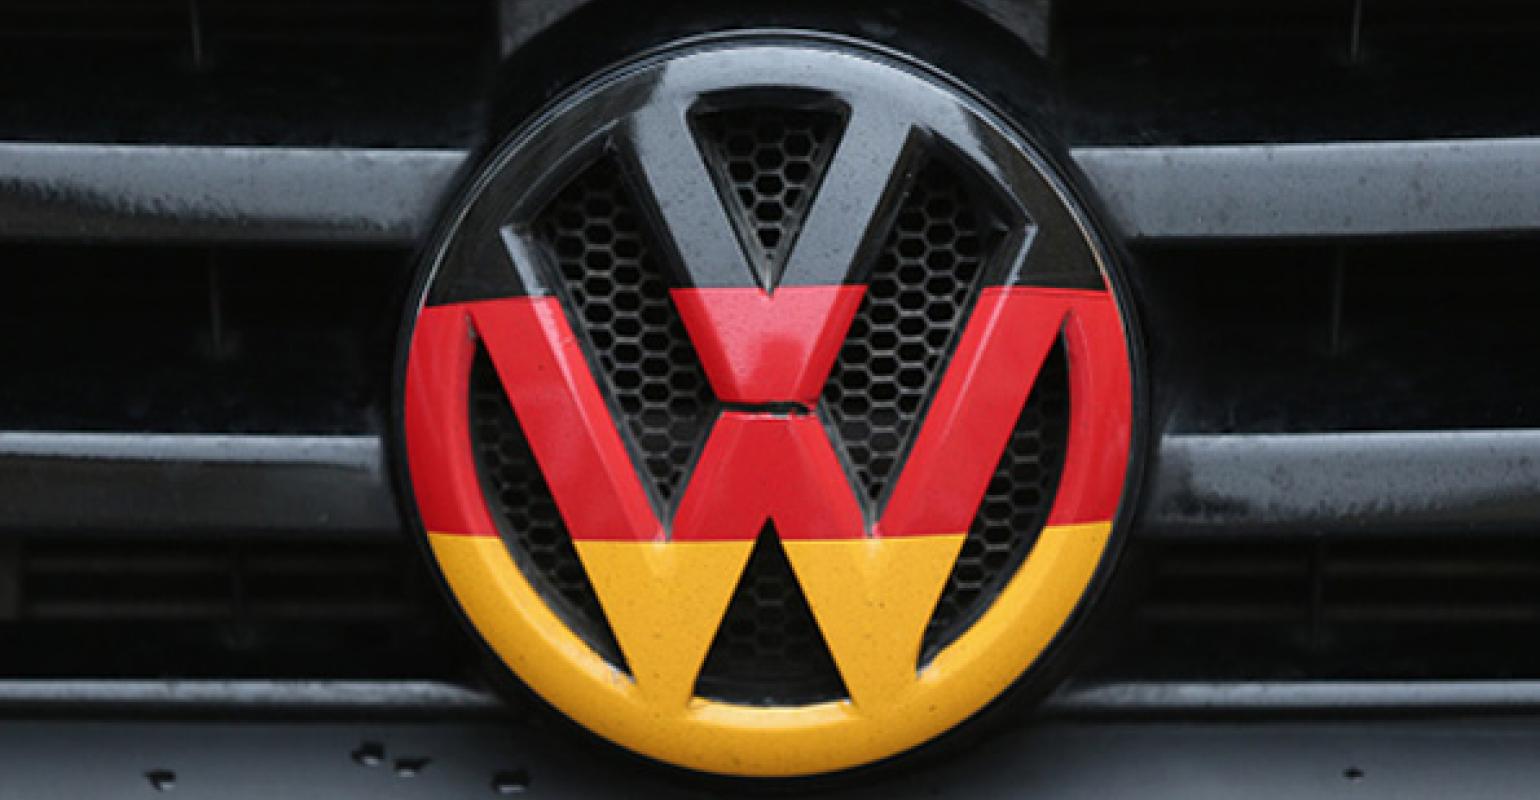 German VW Logo - Volkswagen Taking Action to Curb Future Oversights, Scandals